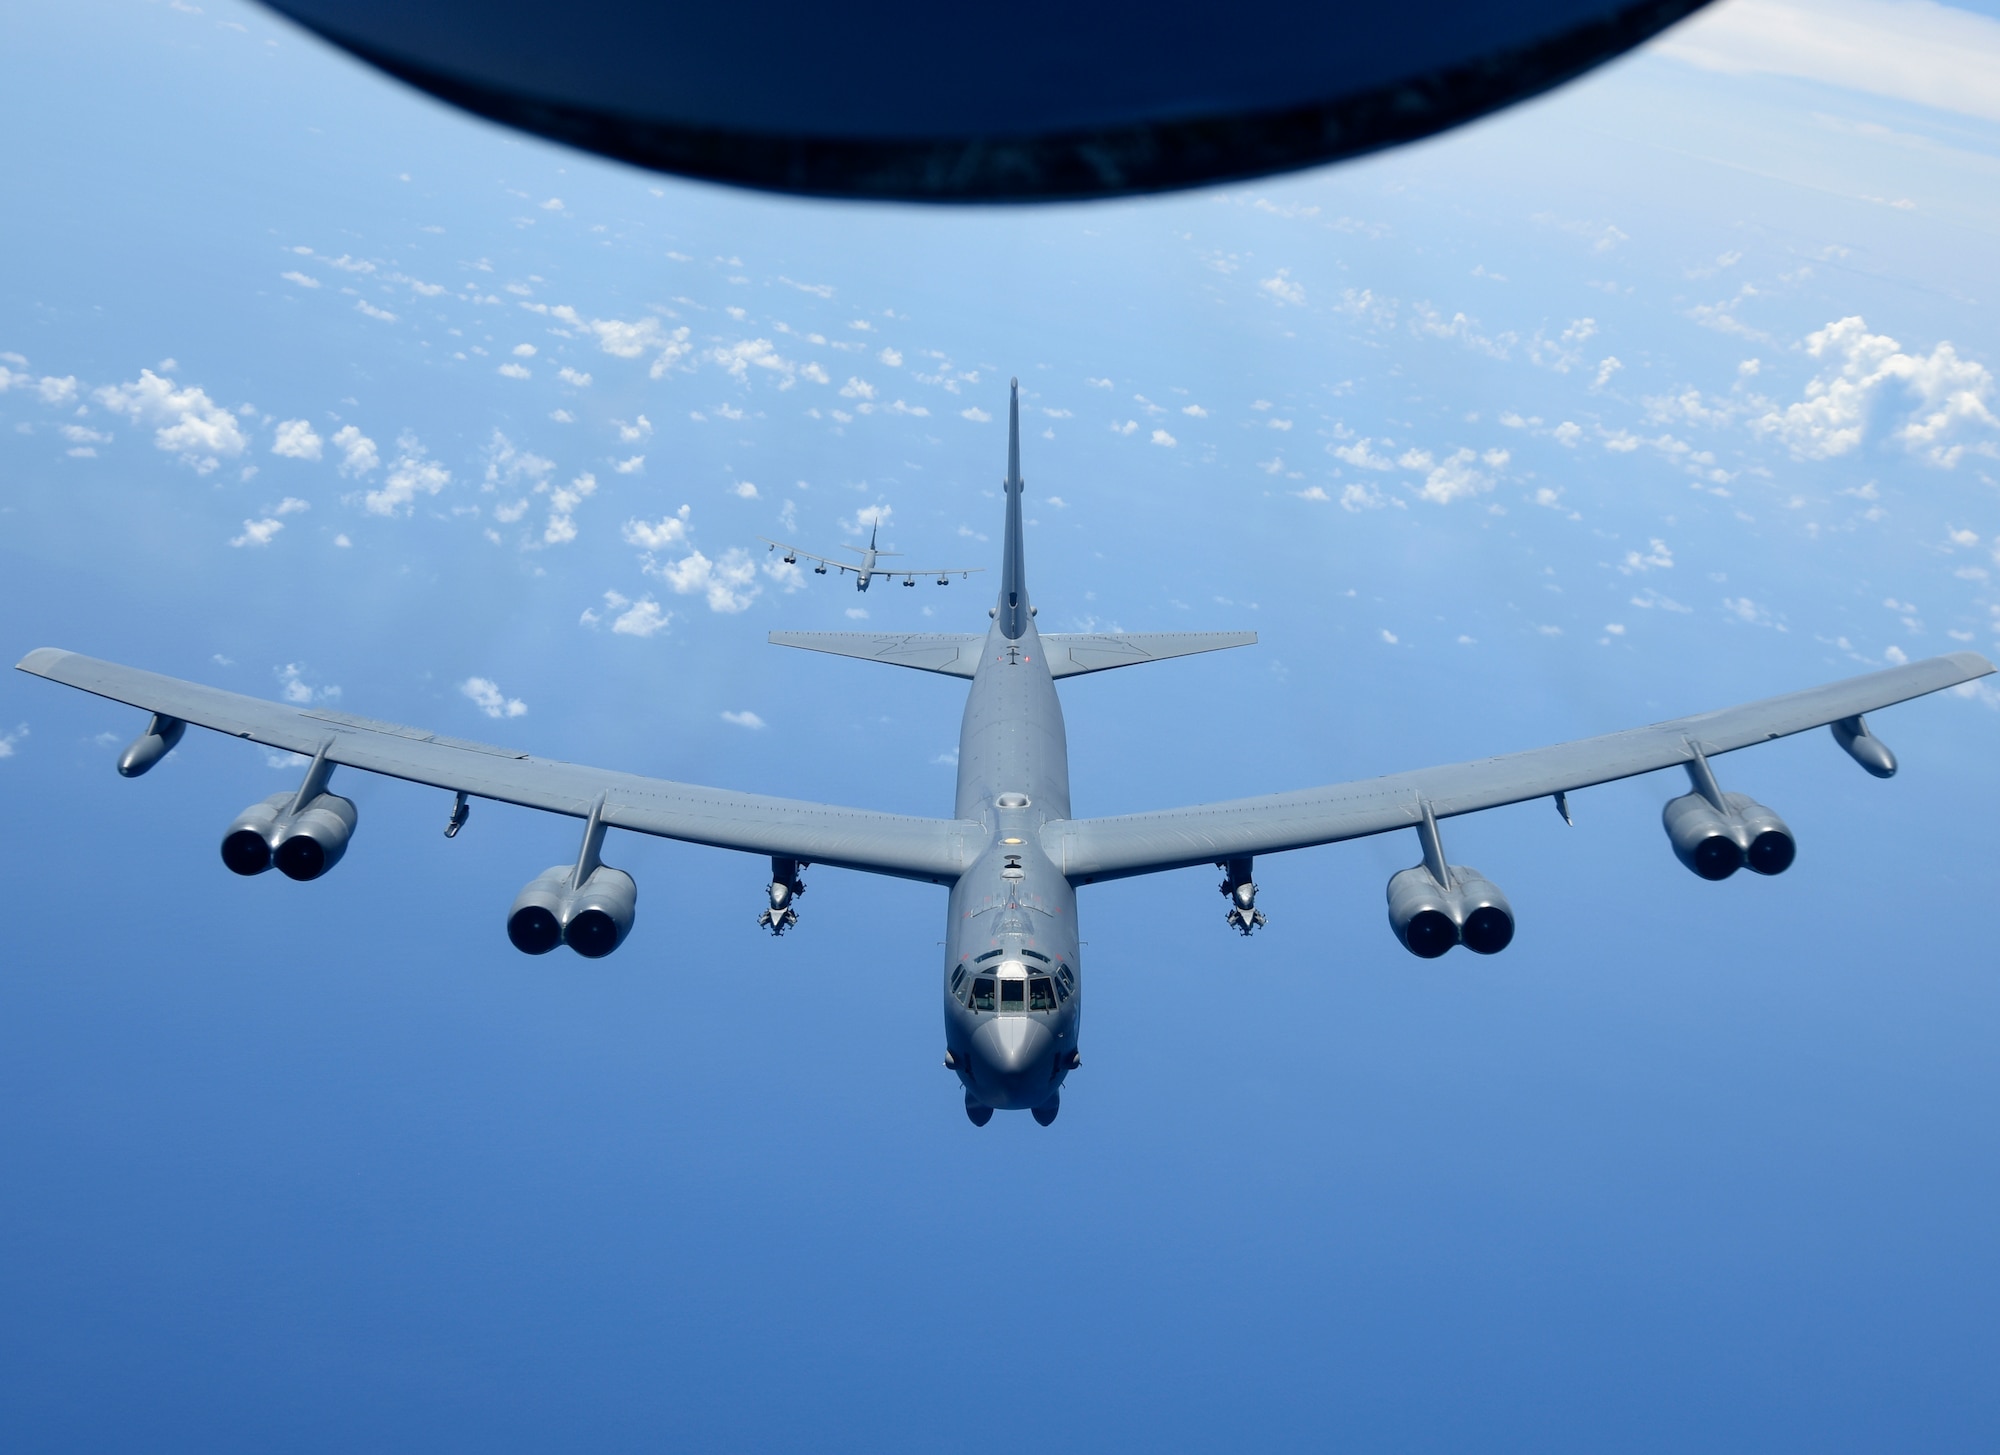 A U.S. Air Force B-52H Stratofortress bomber fly over the Pacific Ocean during a routine training mission Aug. 2, 2018. This mission was flown in support of U.S. Indo-Pacific Command’s Continuous Bomber Presence operations, which are a key component to improving combined and joint service interoperability. (U.S. Air Force photo by Airman 1st Class Gerald R. Willis)